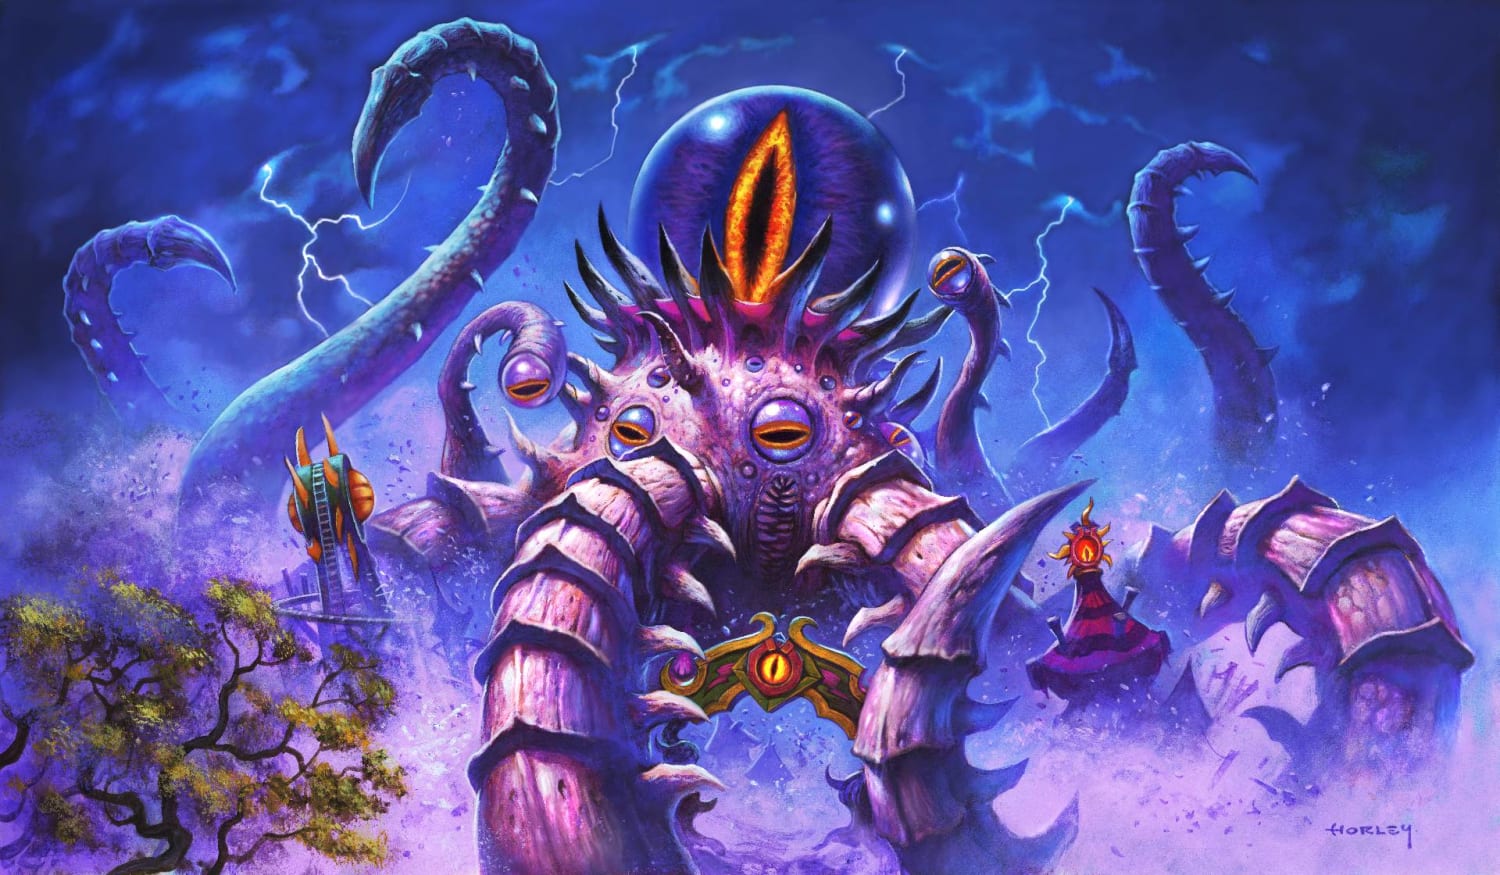 Hearthstone Darkmoon Faire: Everything you need to know